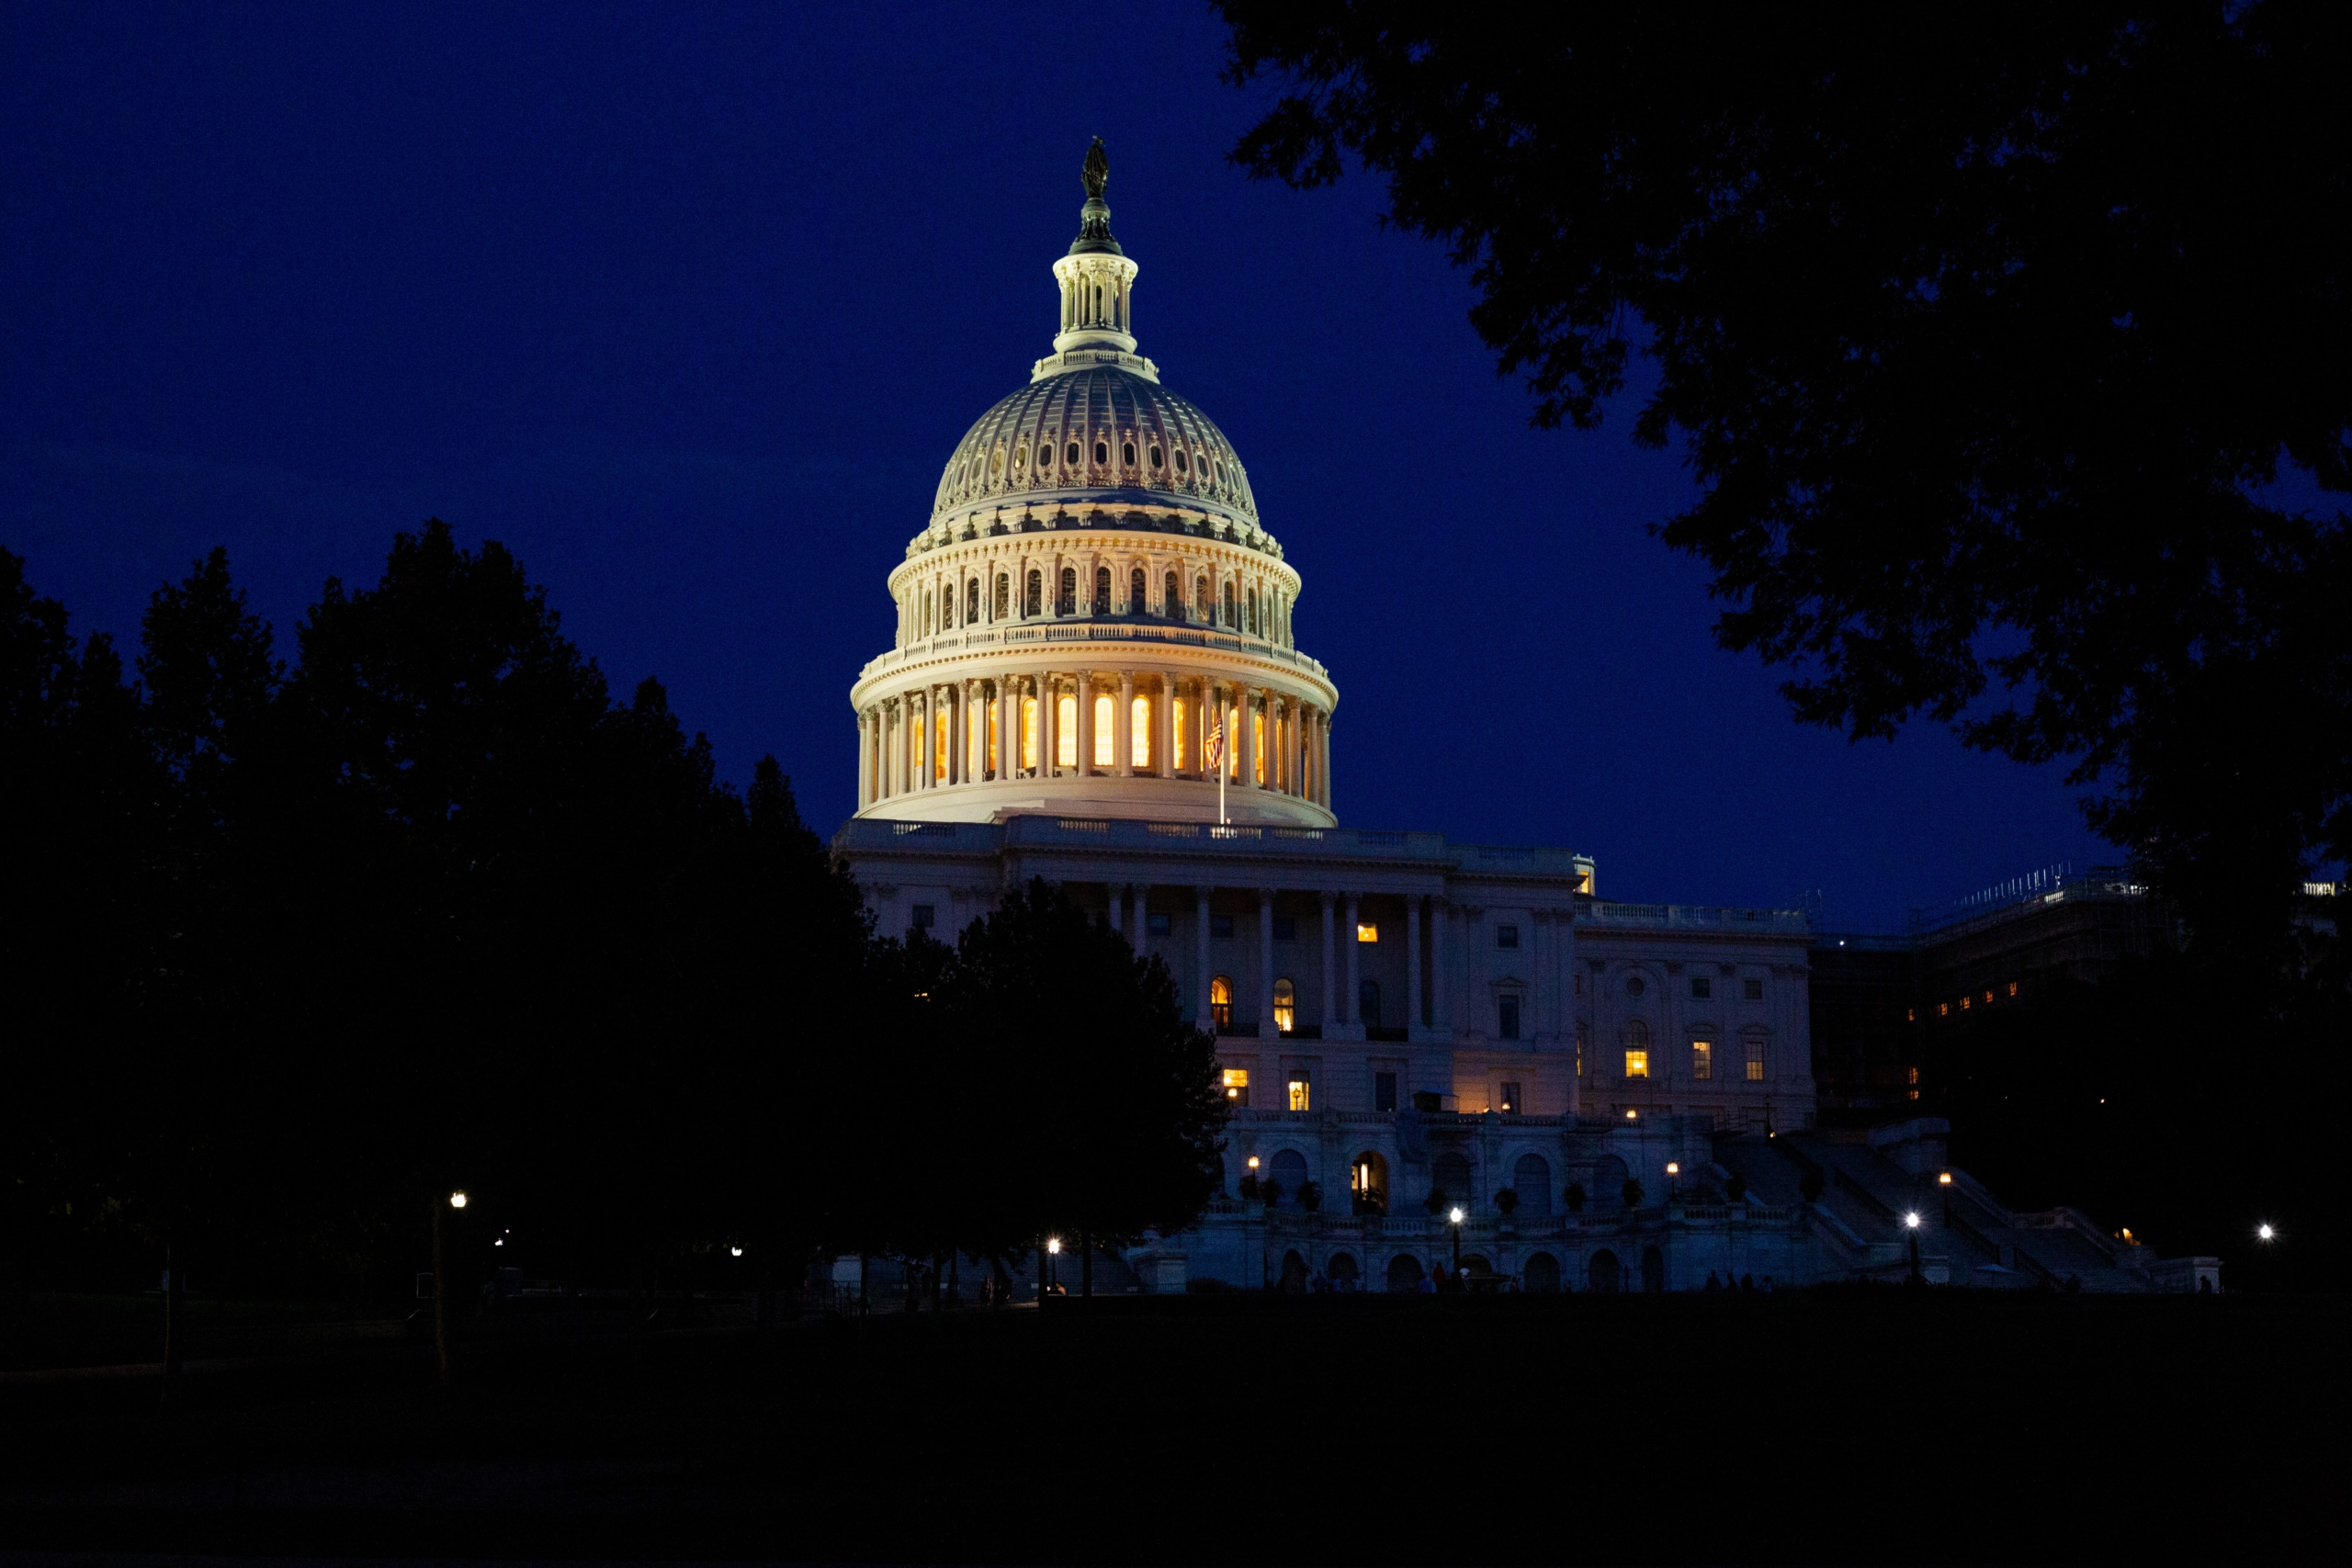 U.S. Capitol building dome at night